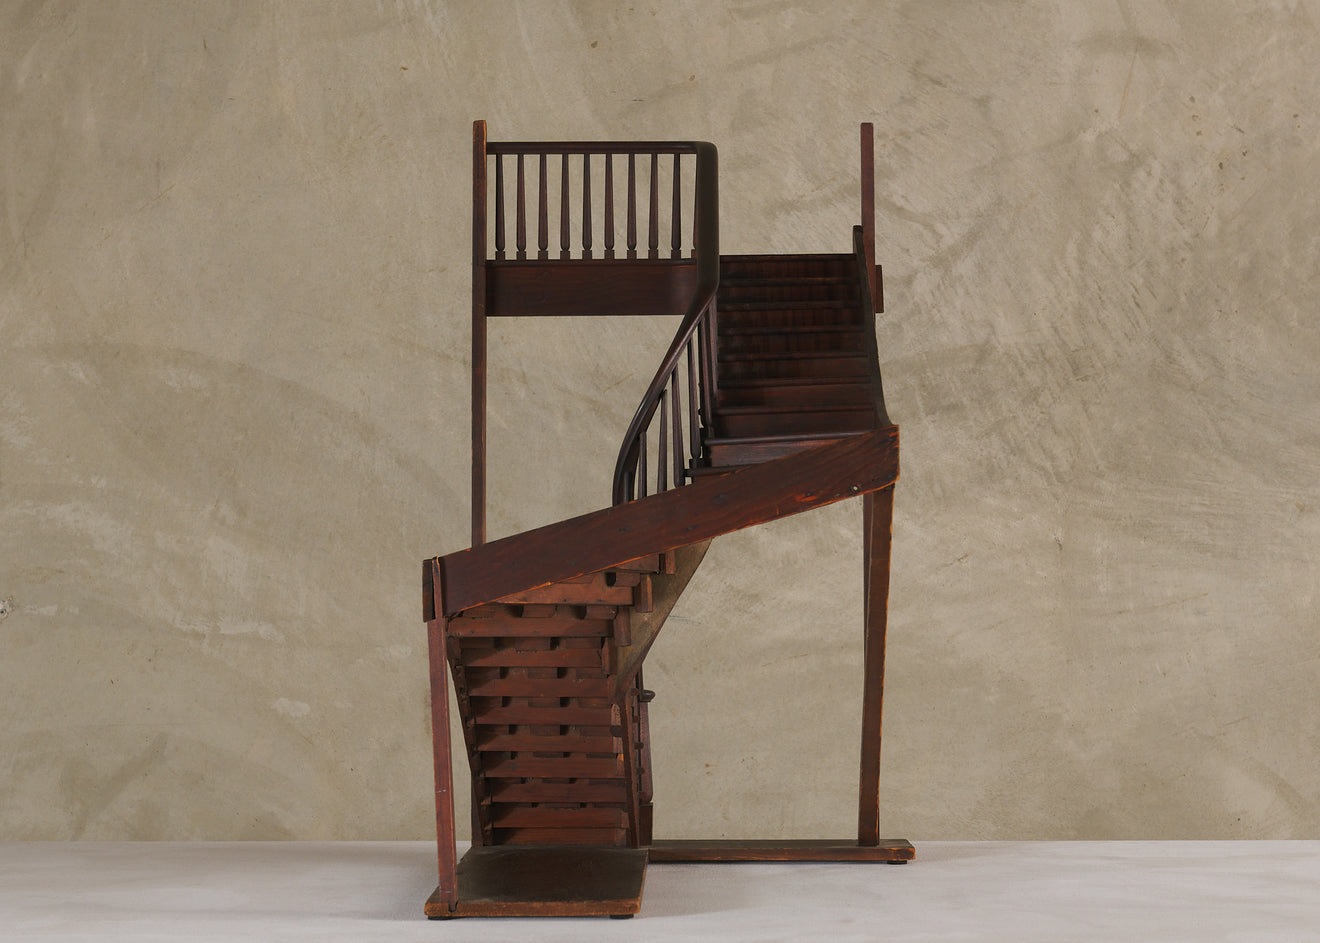 UNUSUALLY LARGE STAIRCASE MAQUETTE